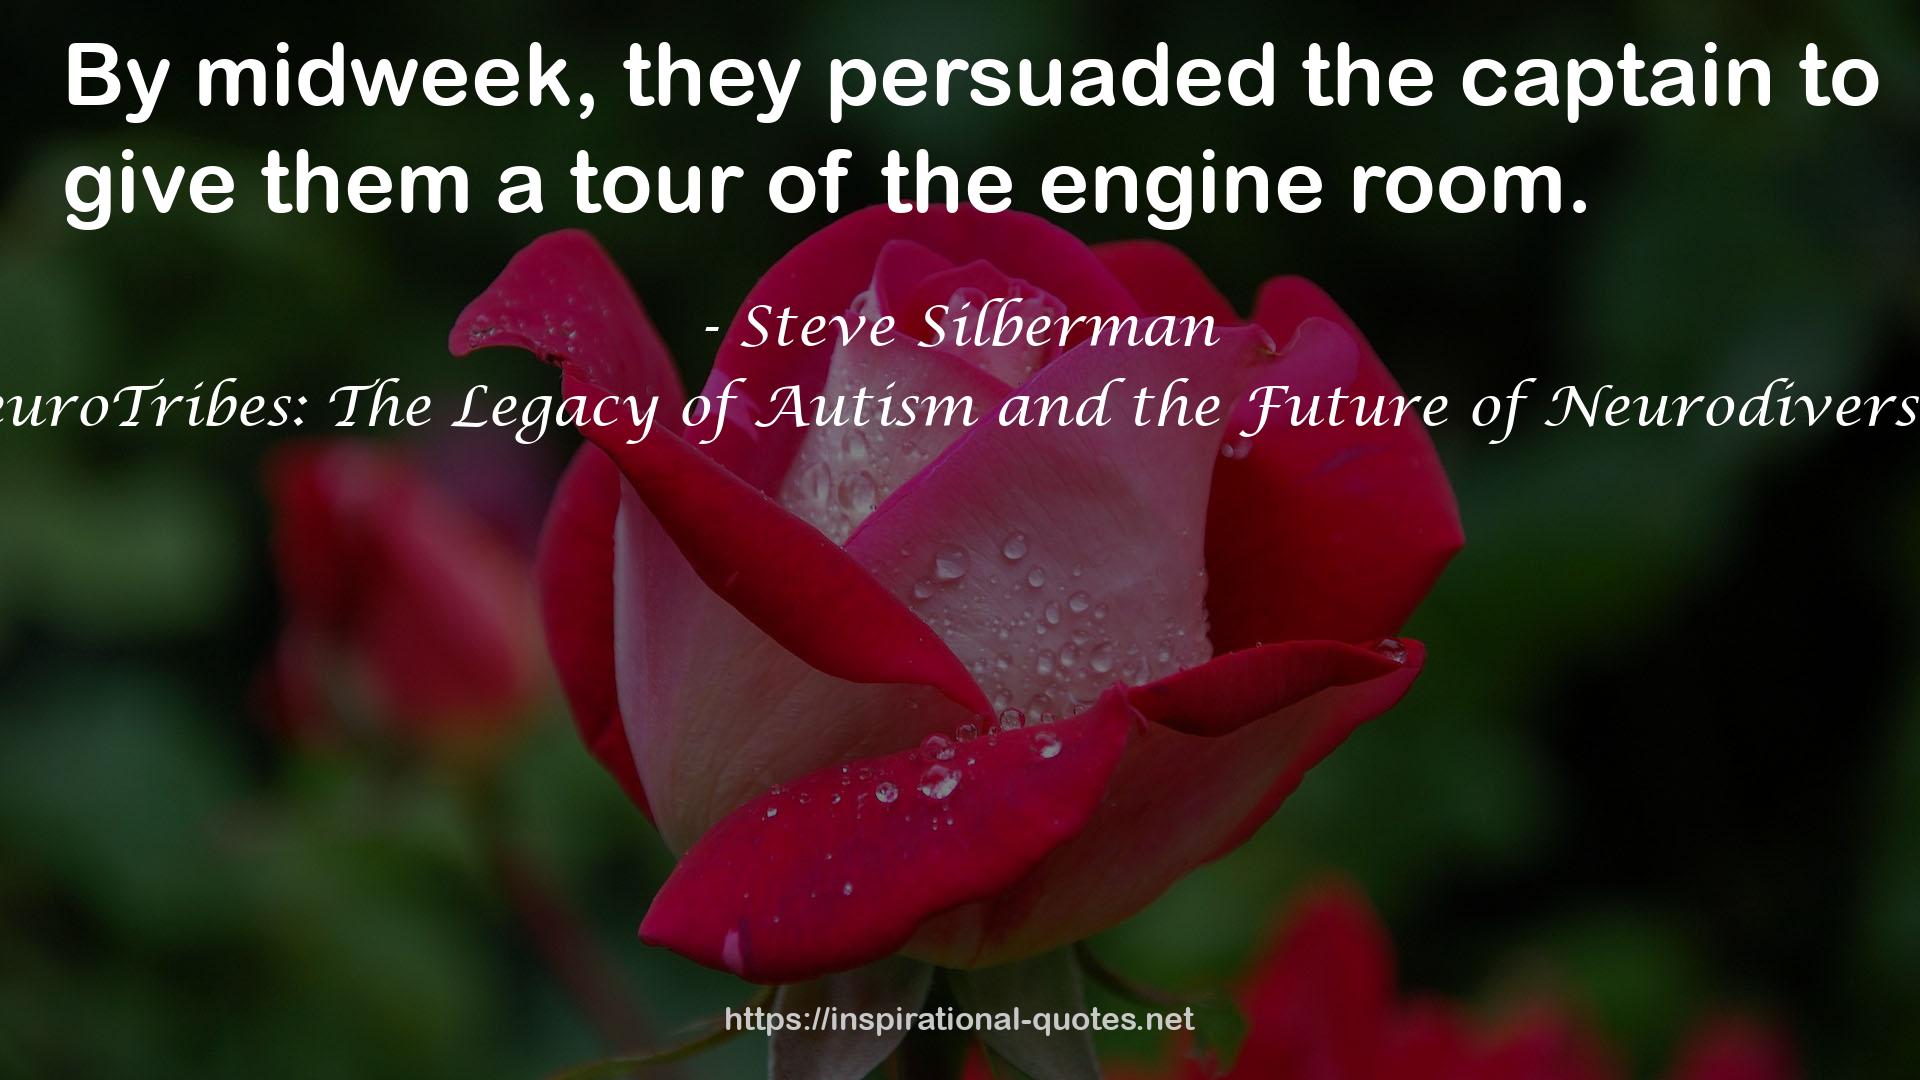 NeuroTribes: The Legacy of Autism and the Future of Neurodiversity QUOTES